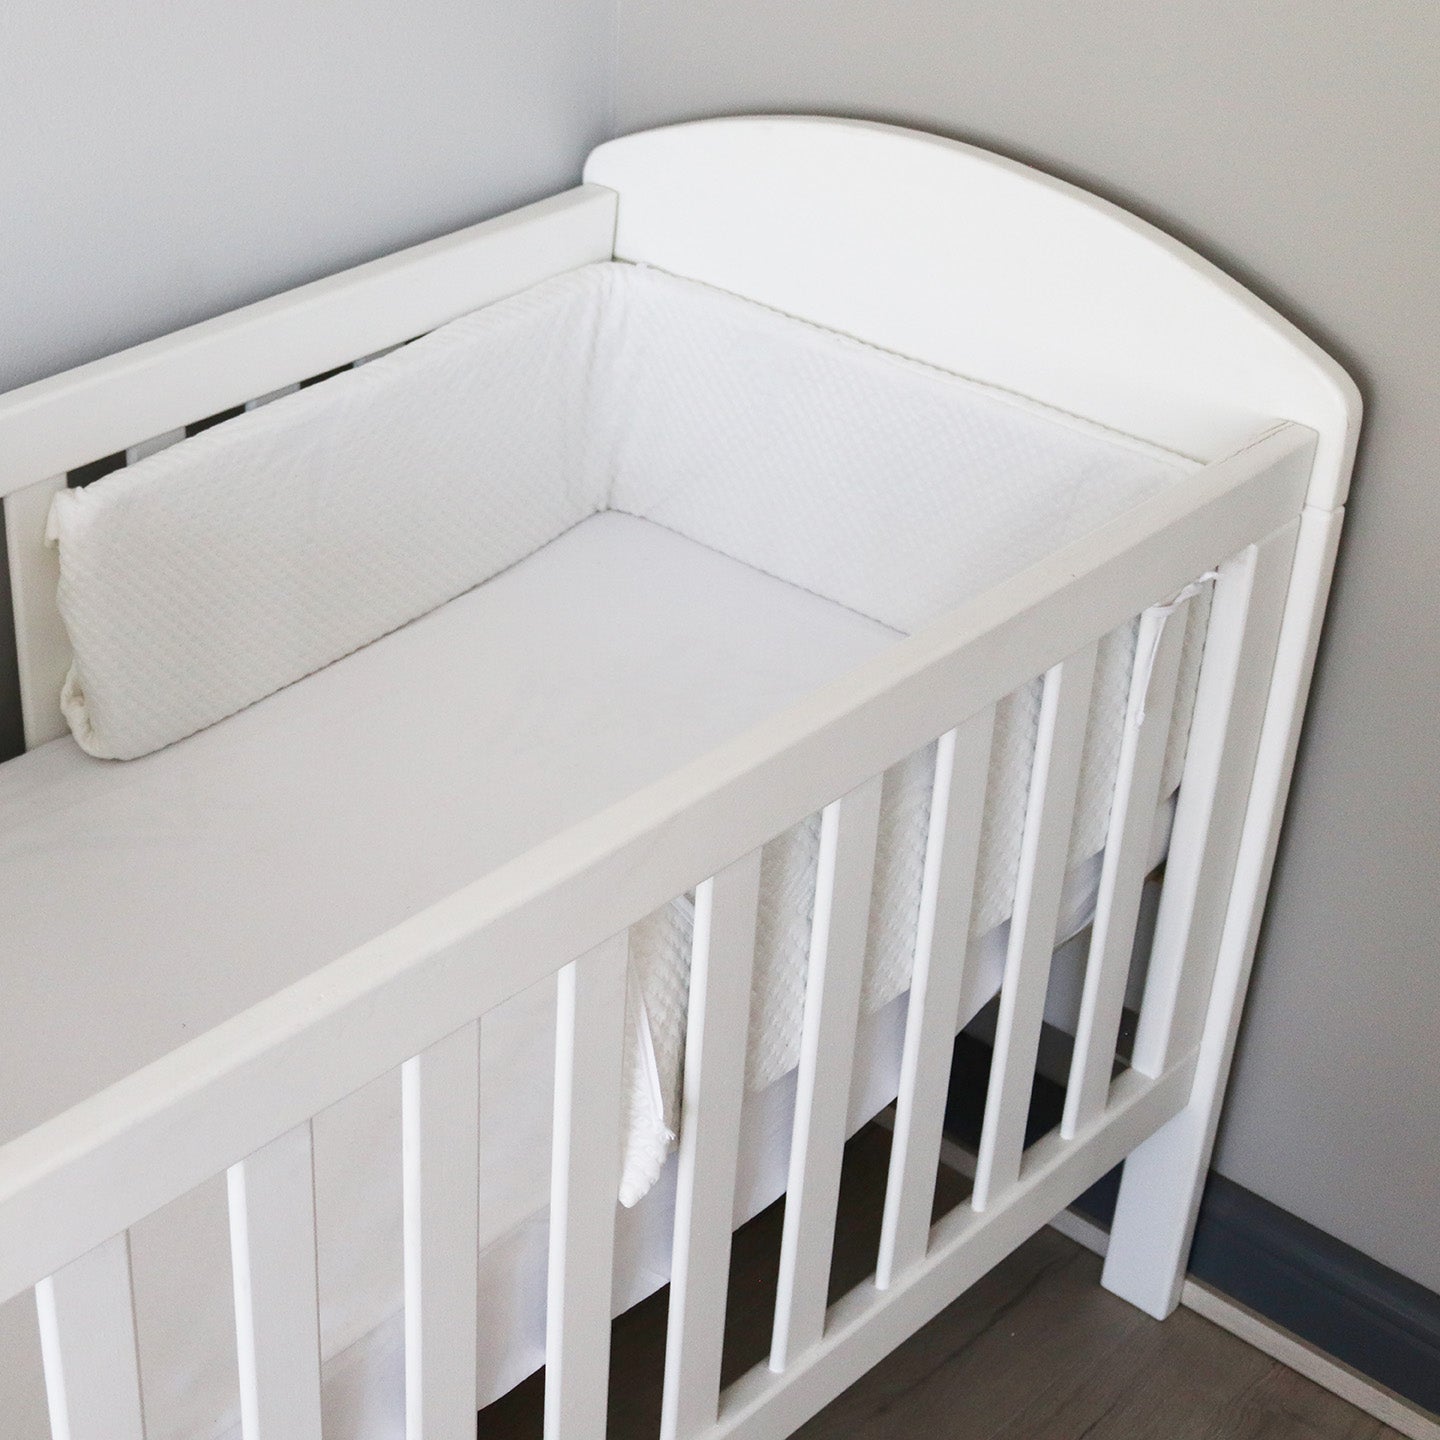 Snuggletime Bamboopaedic Cot Bumper and Cover